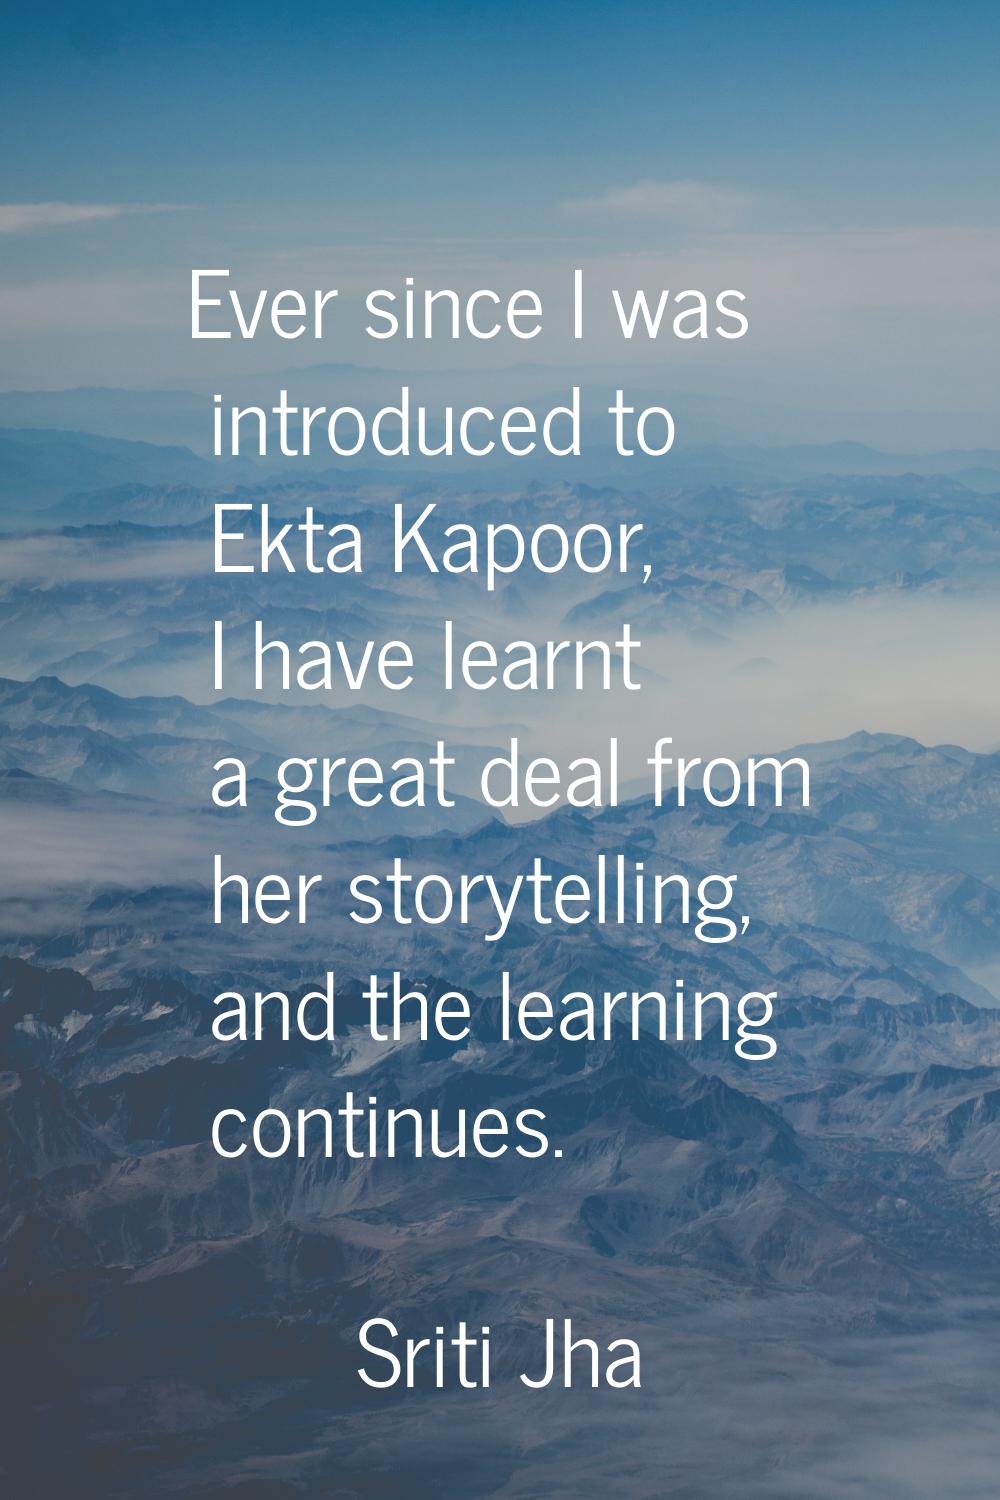 Ever since I was introduced to Ekta Kapoor, I have learnt a great deal from her storytelling, and t